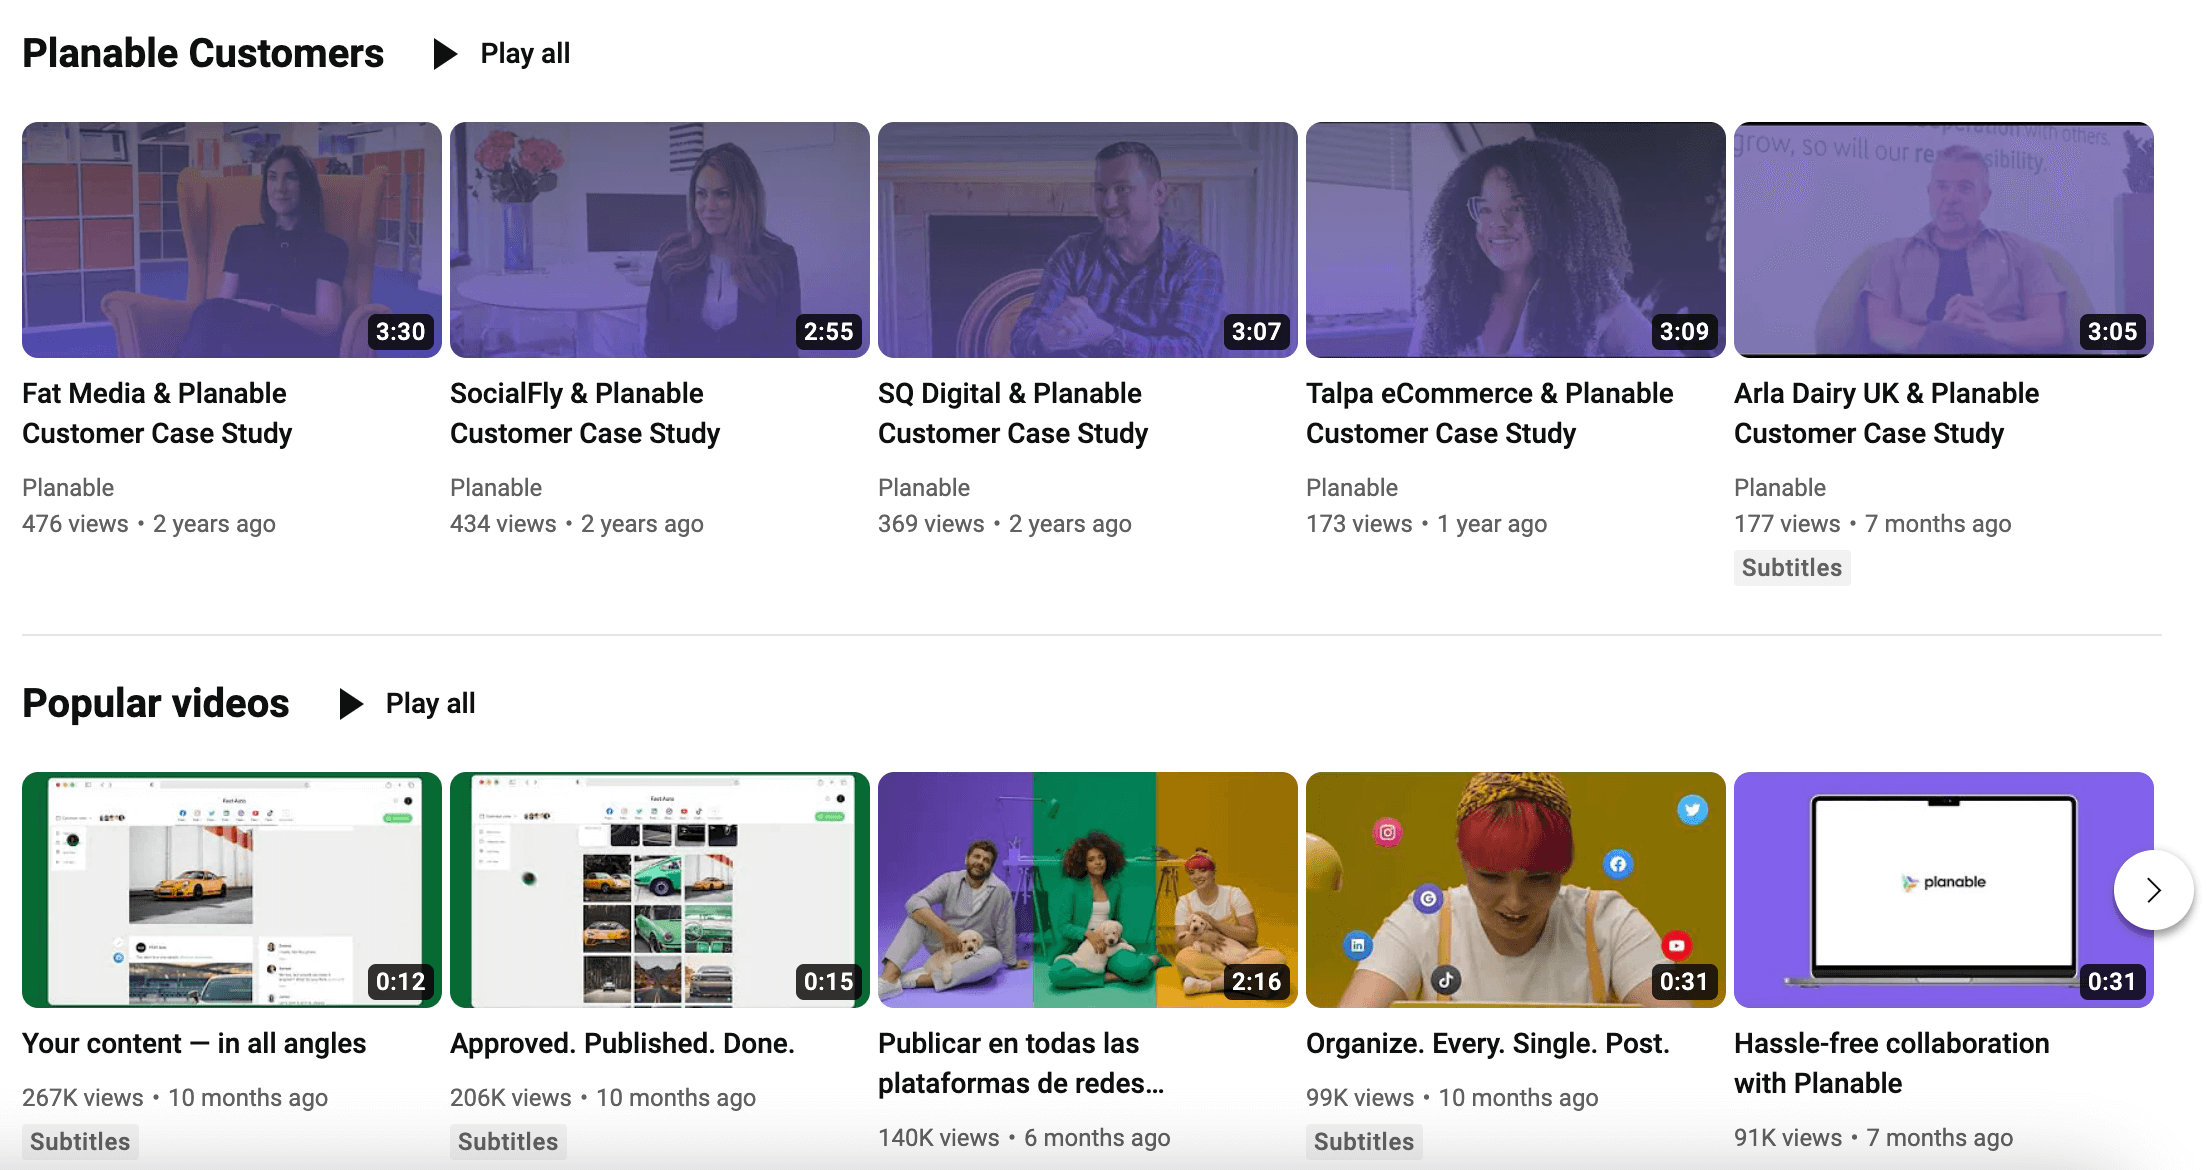 Video content pieces including a Planable Customers playlist with case studies and Popular videos.